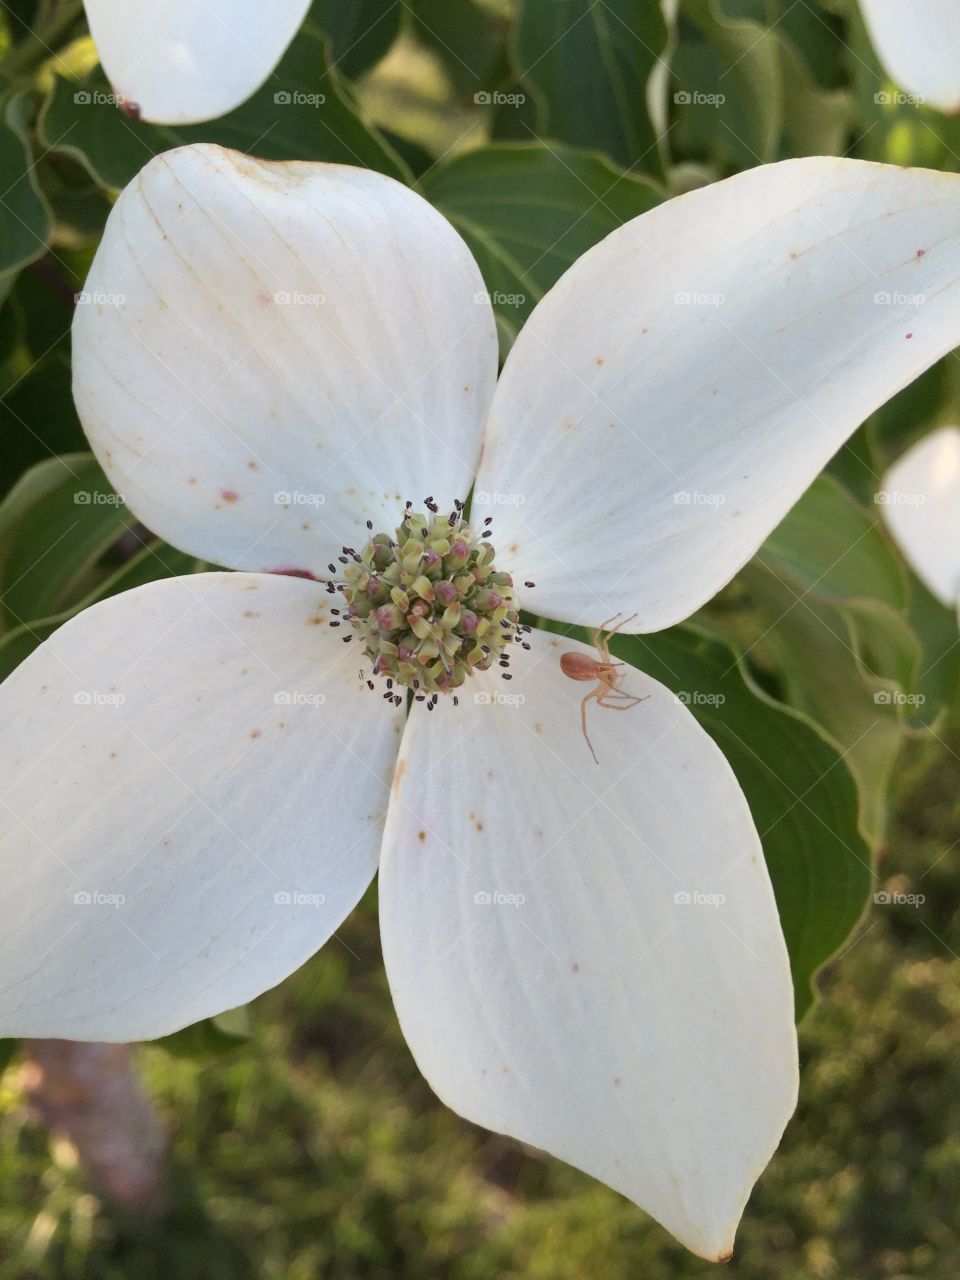 Spiders Hangout. Japanese Dogwood flower in my yard with a tiny spider on it. 